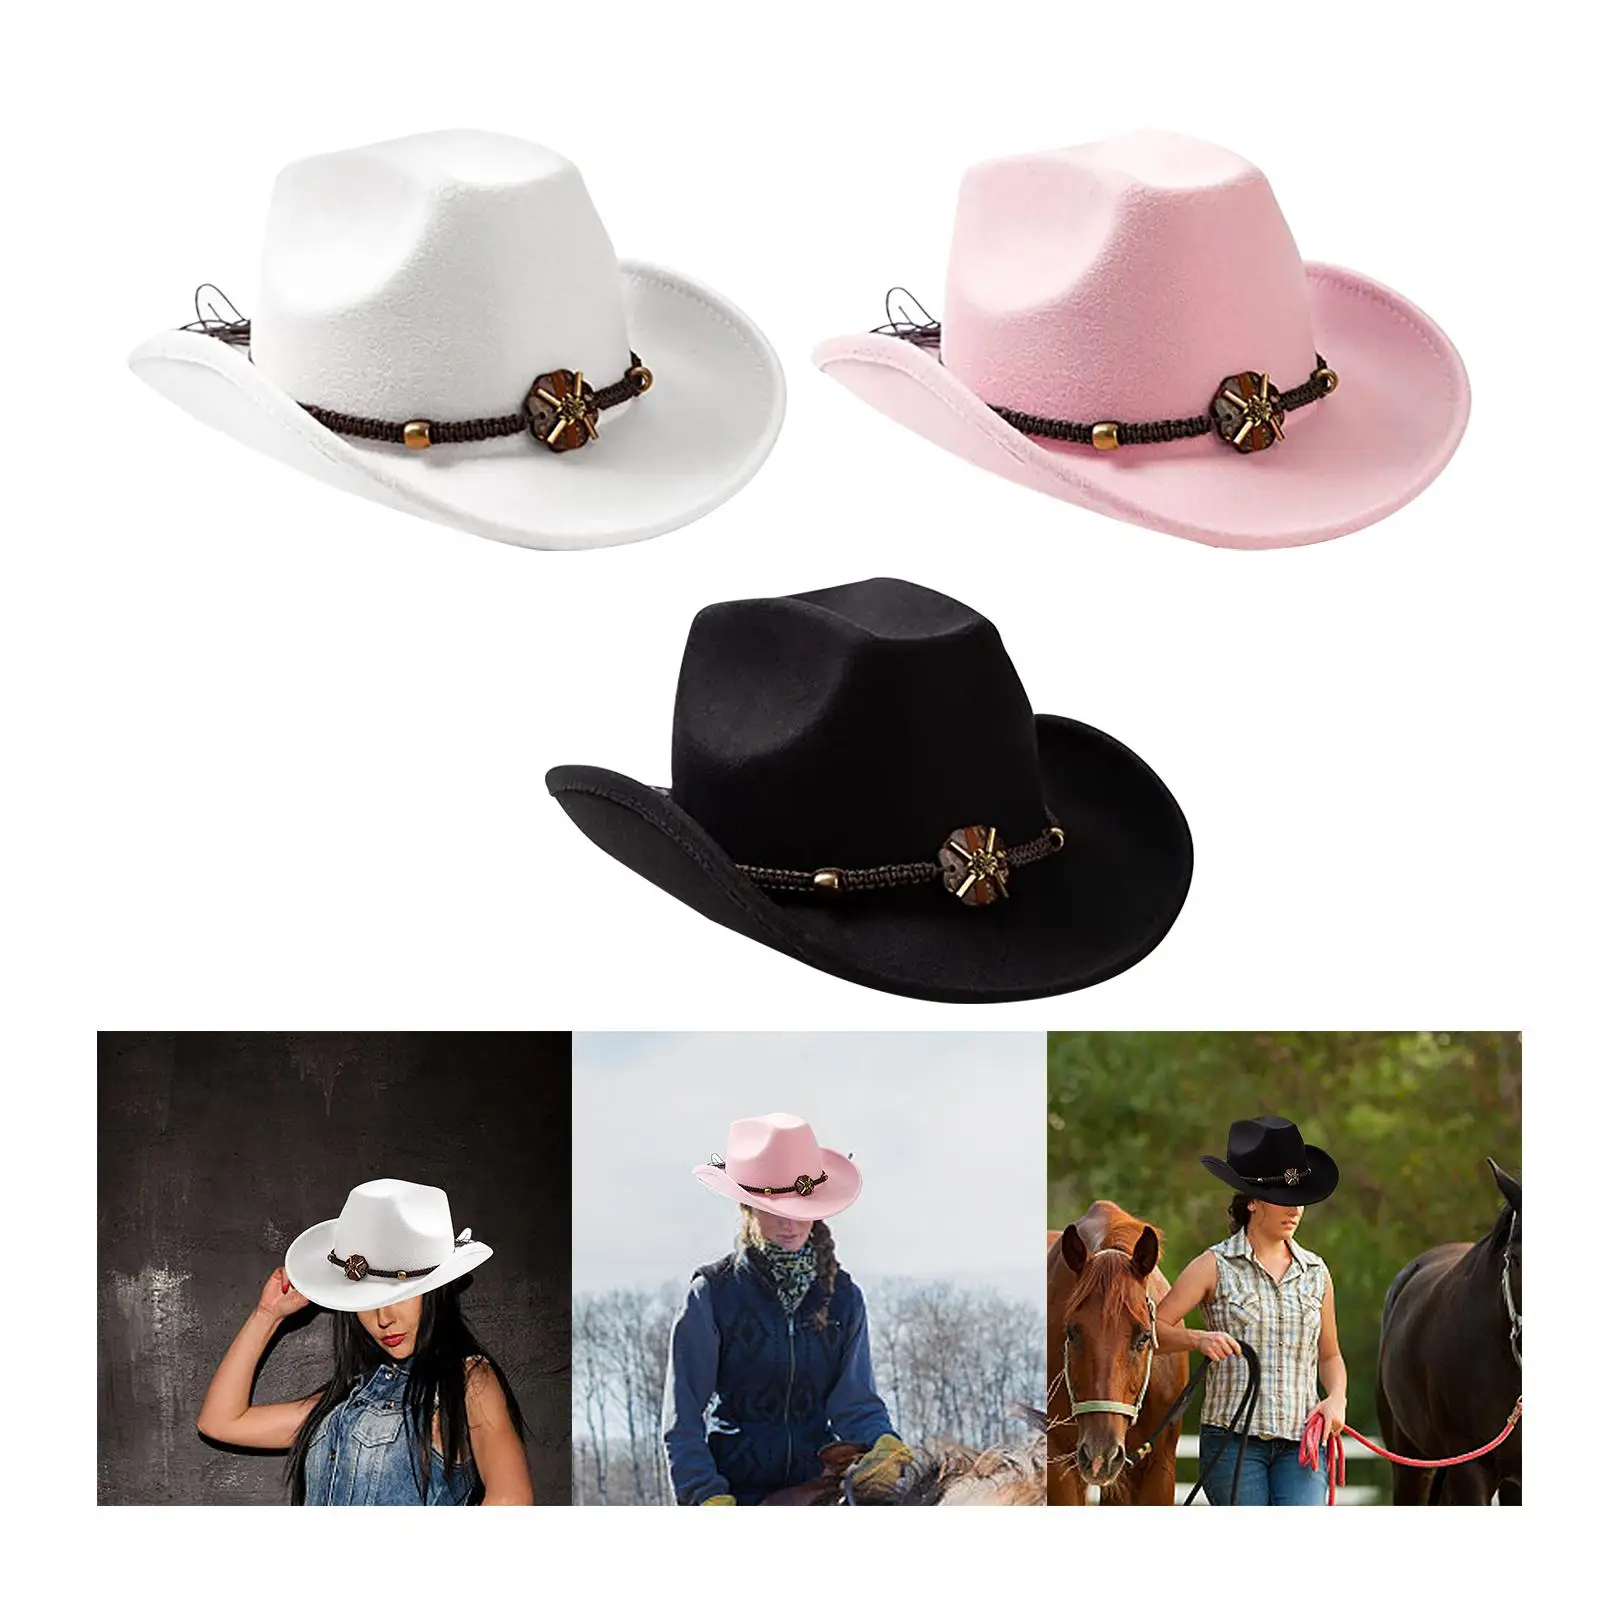 Casual Cowboy Hat Photo Props Wide Brims Sun Hats Costume Fancy Dress Cosplay for Camping, Beach, Travel, Outdoor, Dress up